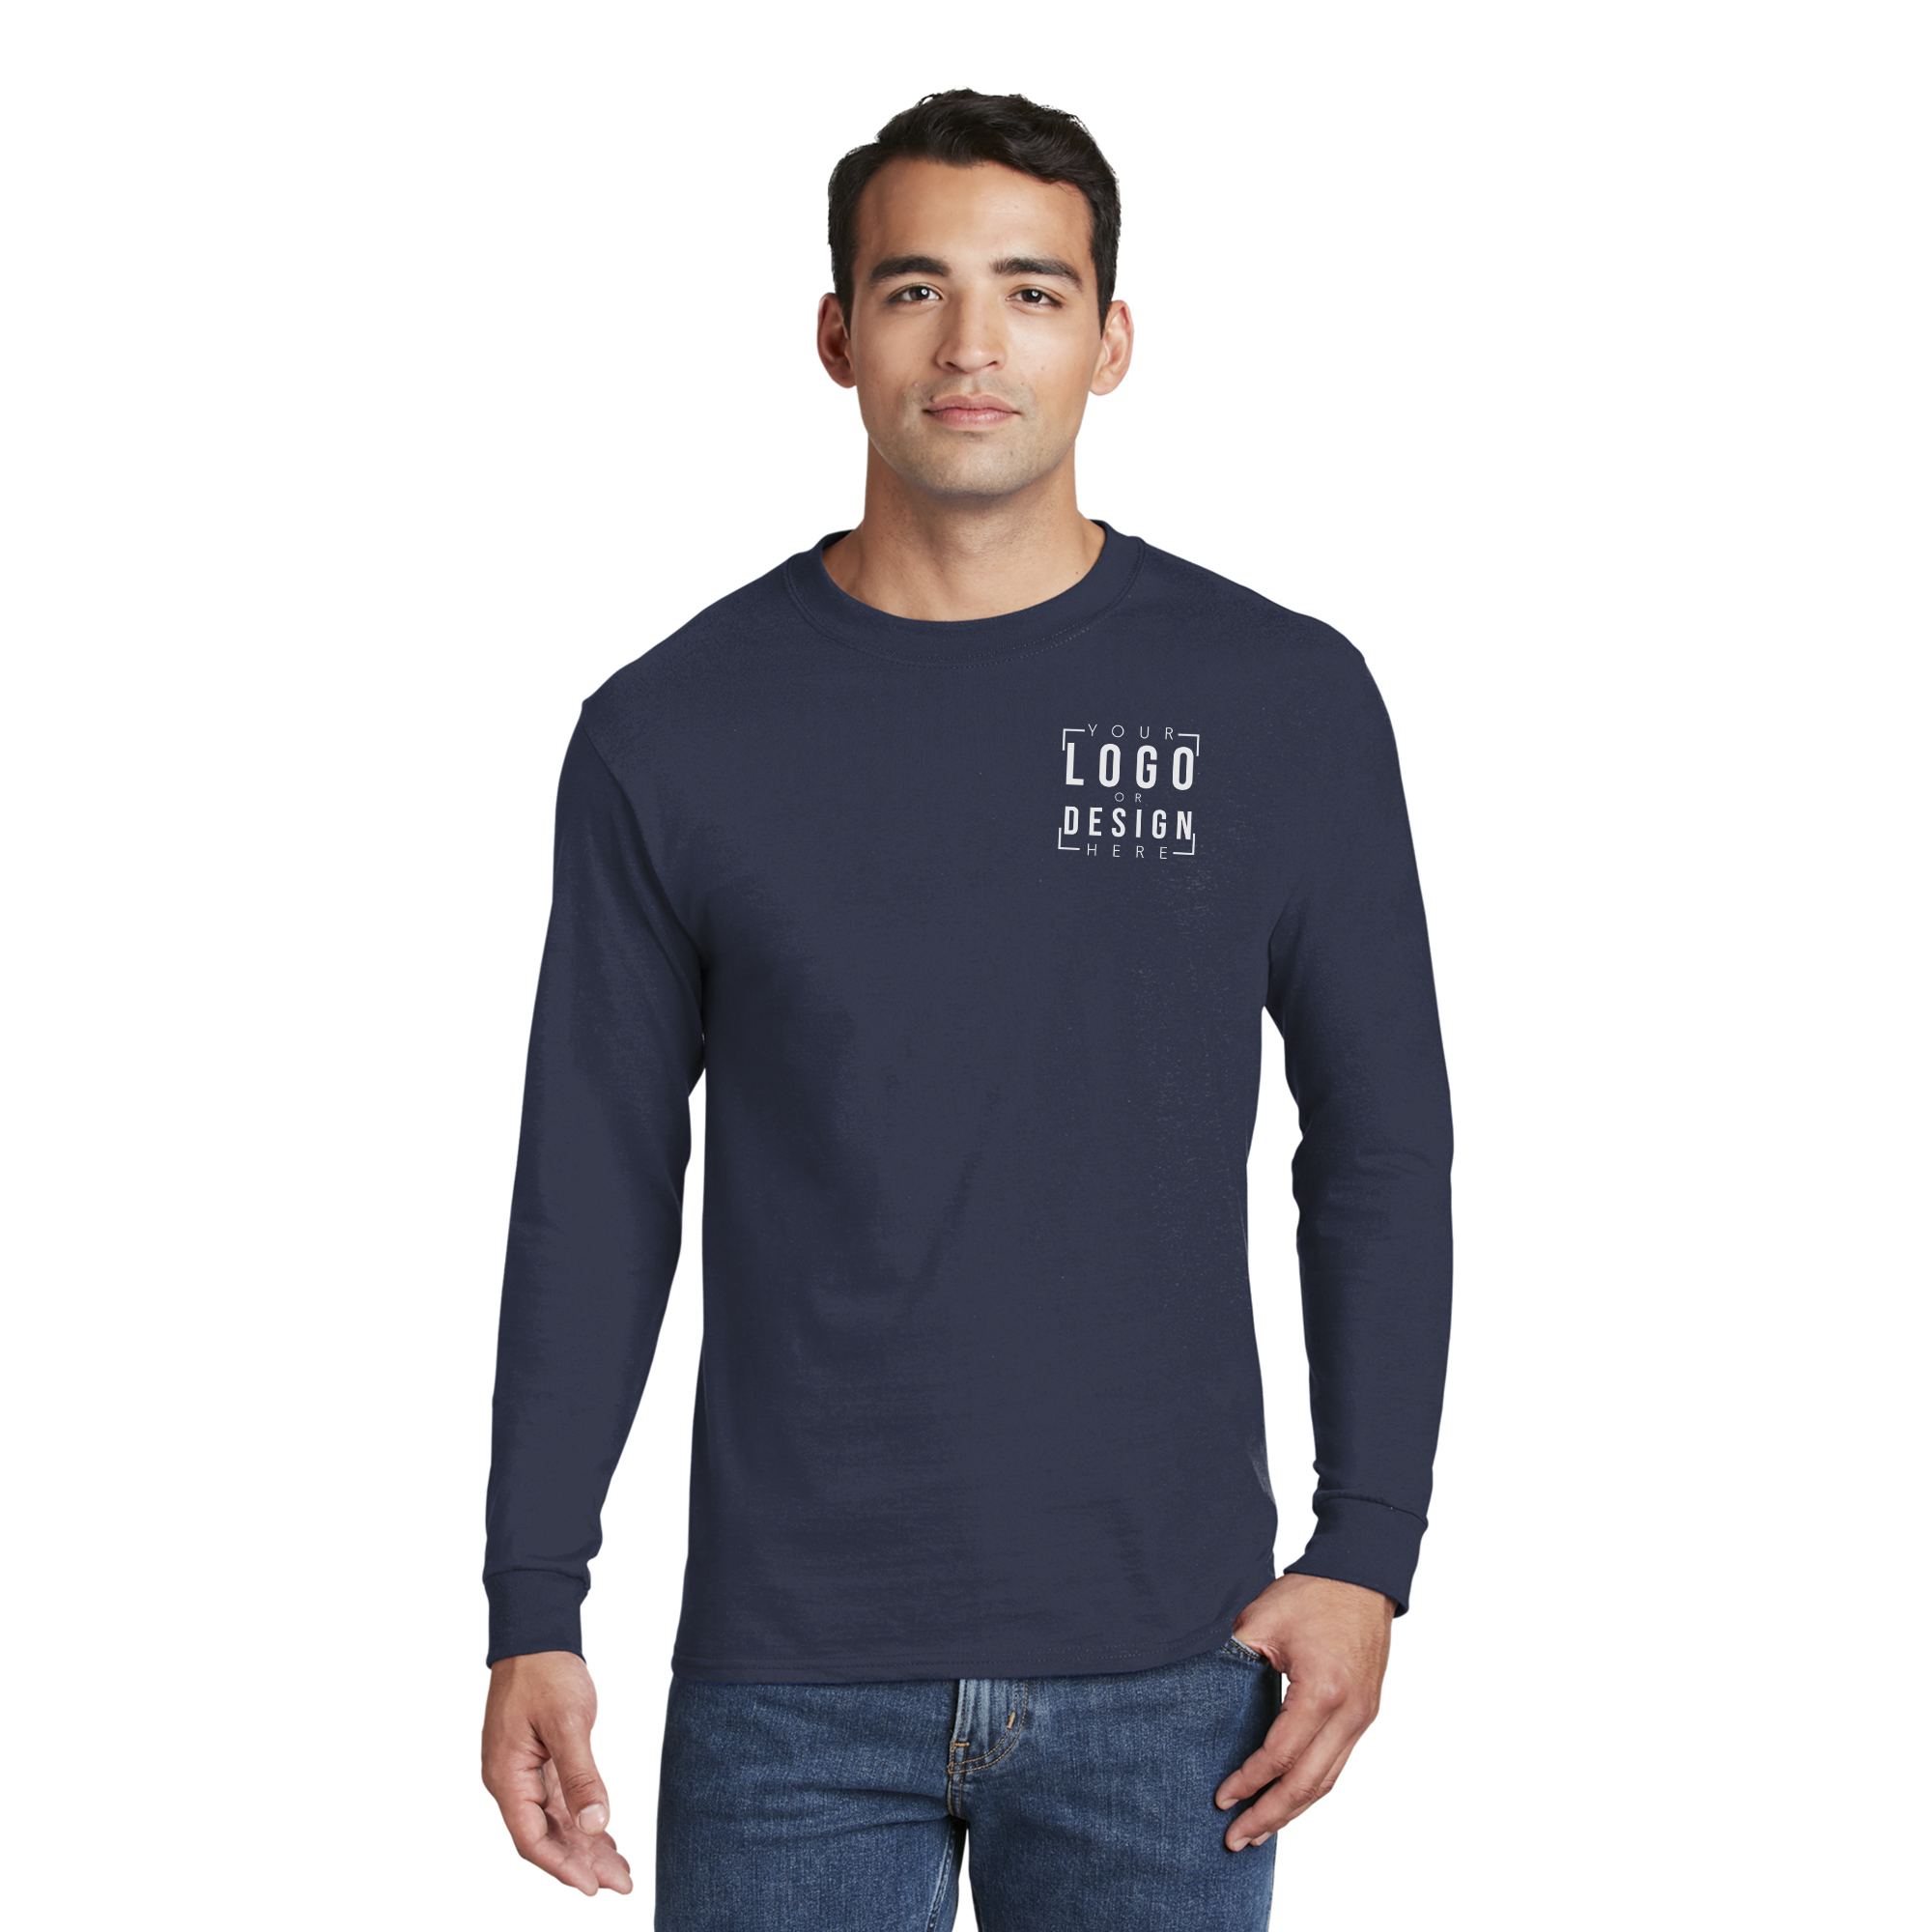 Hanes Beefy-T - 100% Cotton Long Sleeve T-Shirt